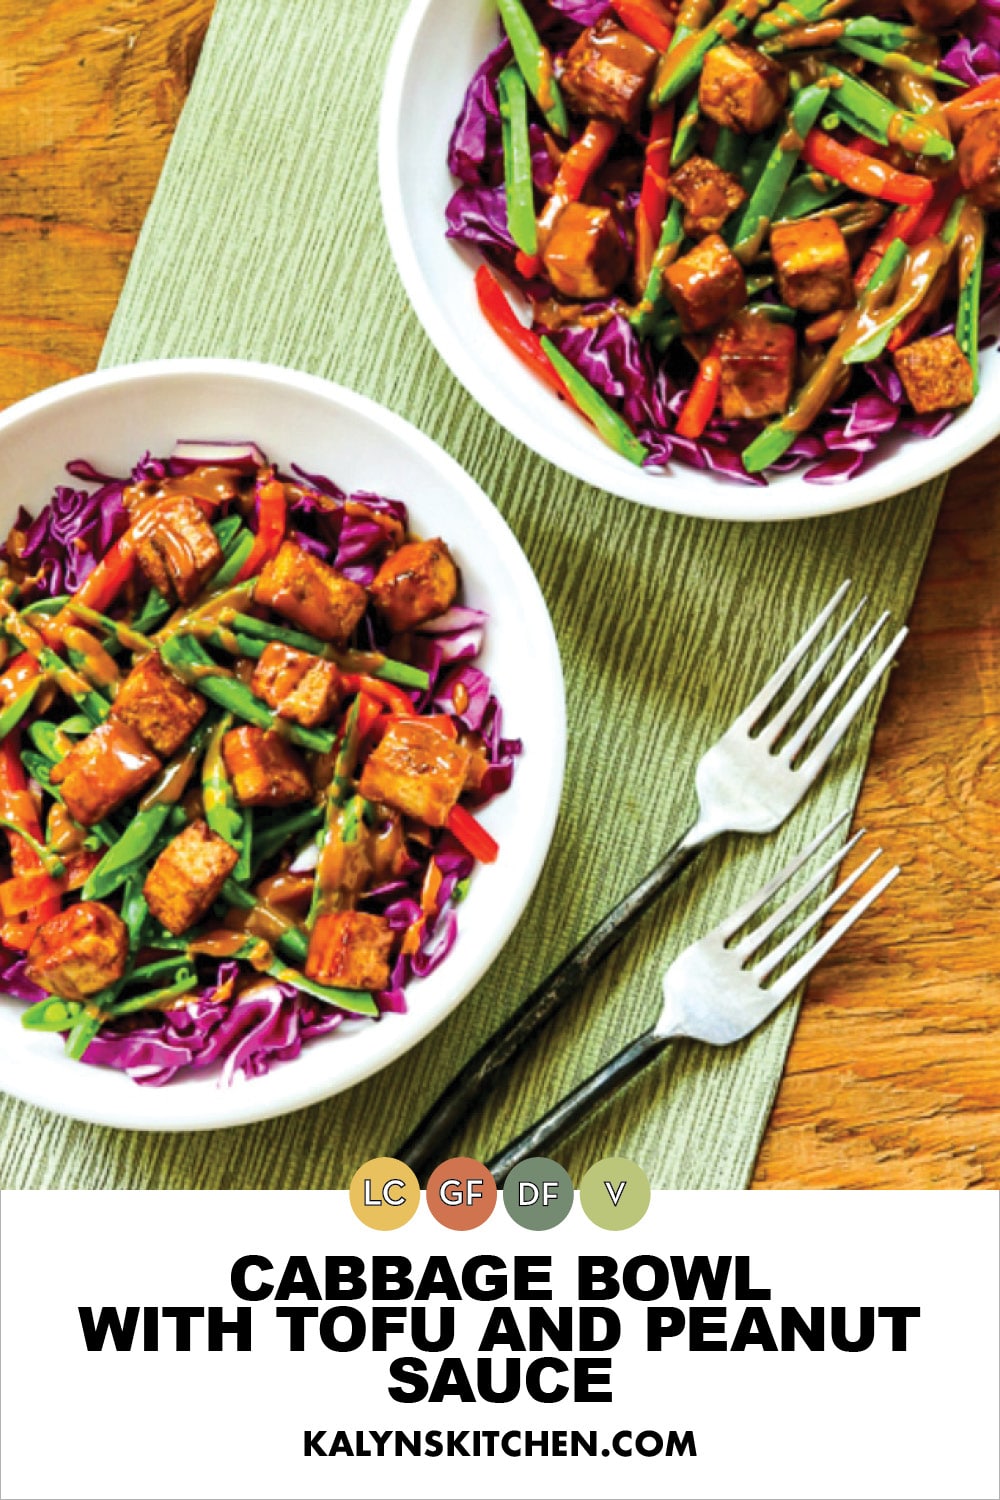 Pinterest image of Cabbage Bowl with Tofu and Peanut Sauce